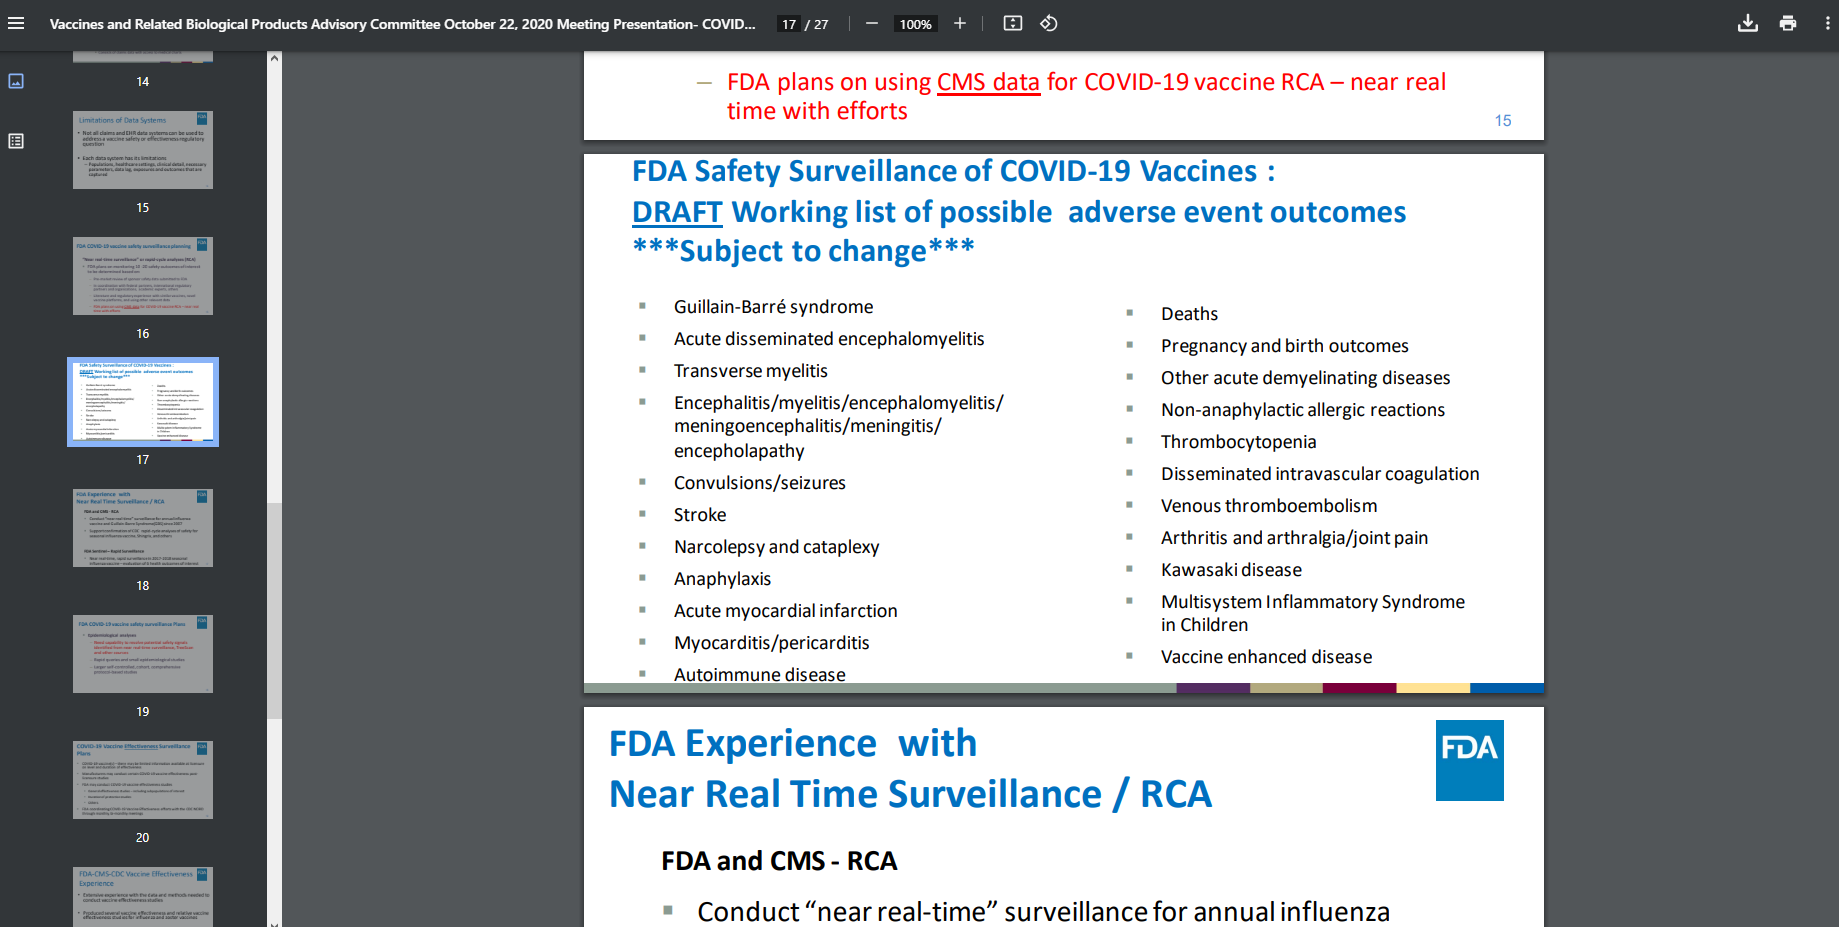 FDA Safety Surveillance of COVID-19 Vaccines : DRAFT Working list of possible adverse event outcomes